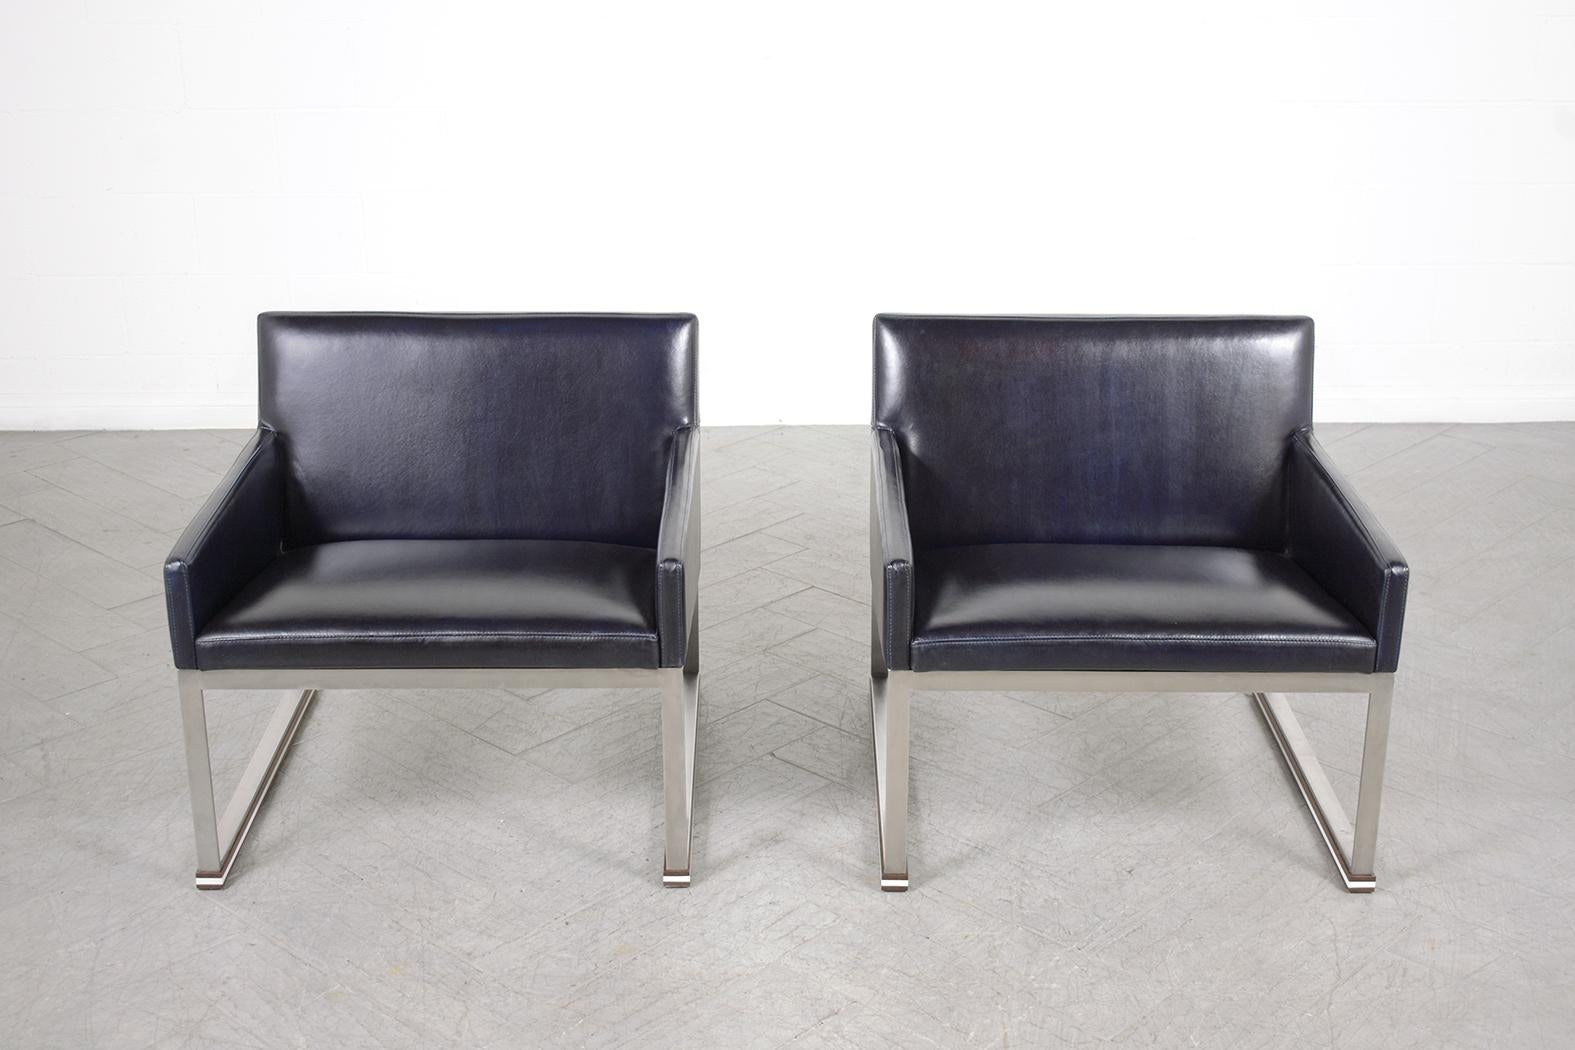 Extraordinary midcentury armchairs beautifully crafted out of leather in great condition completely restored and reupholstered by our expert professional craftsmen team in the house. These lounge chairs feature sleek solid frames made out of steel